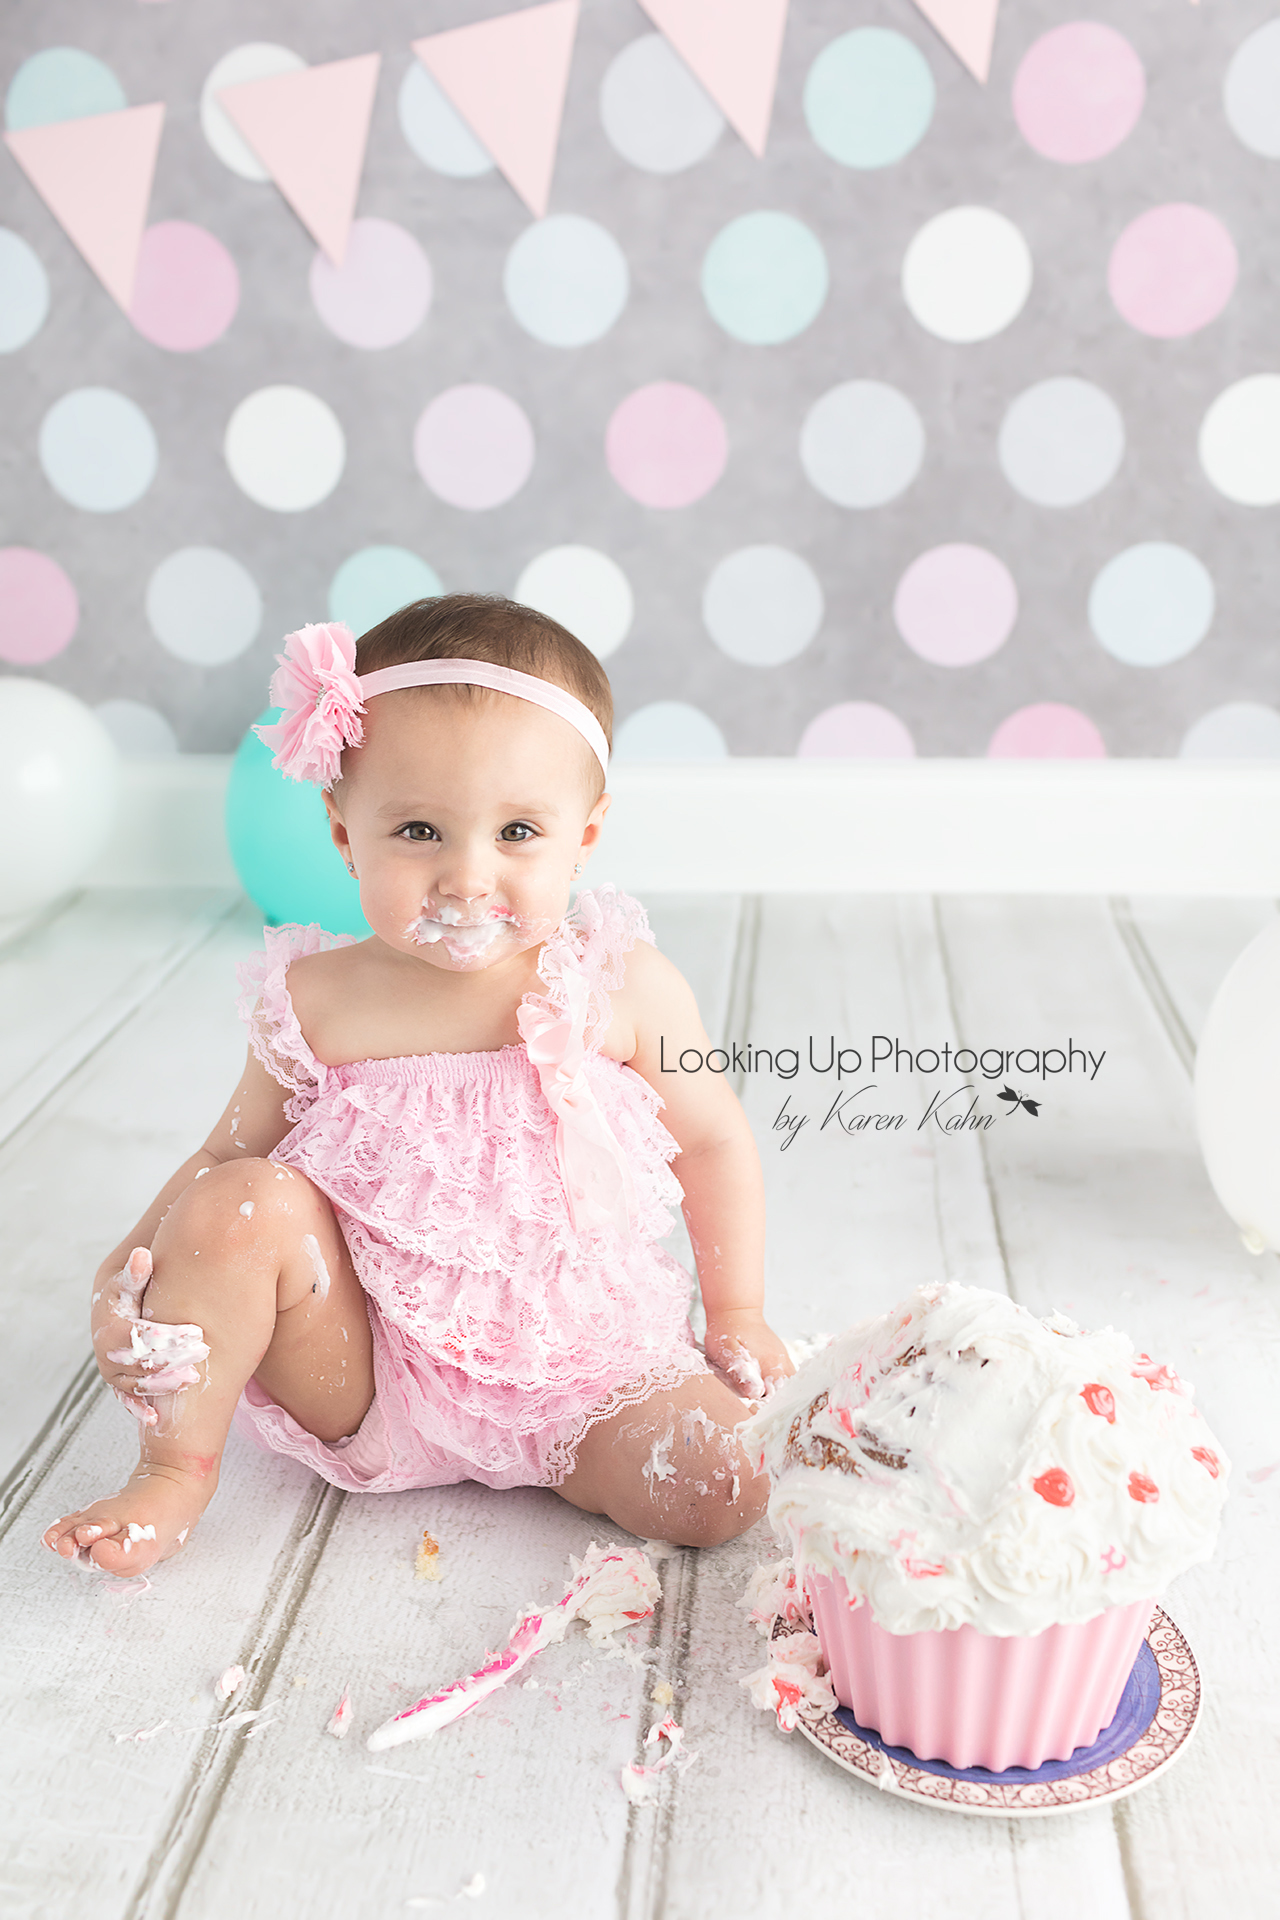 Pink lace for adorable 12 month milestone for baby girl looking sweet with gray polka dots for cake smash session one year old portrait